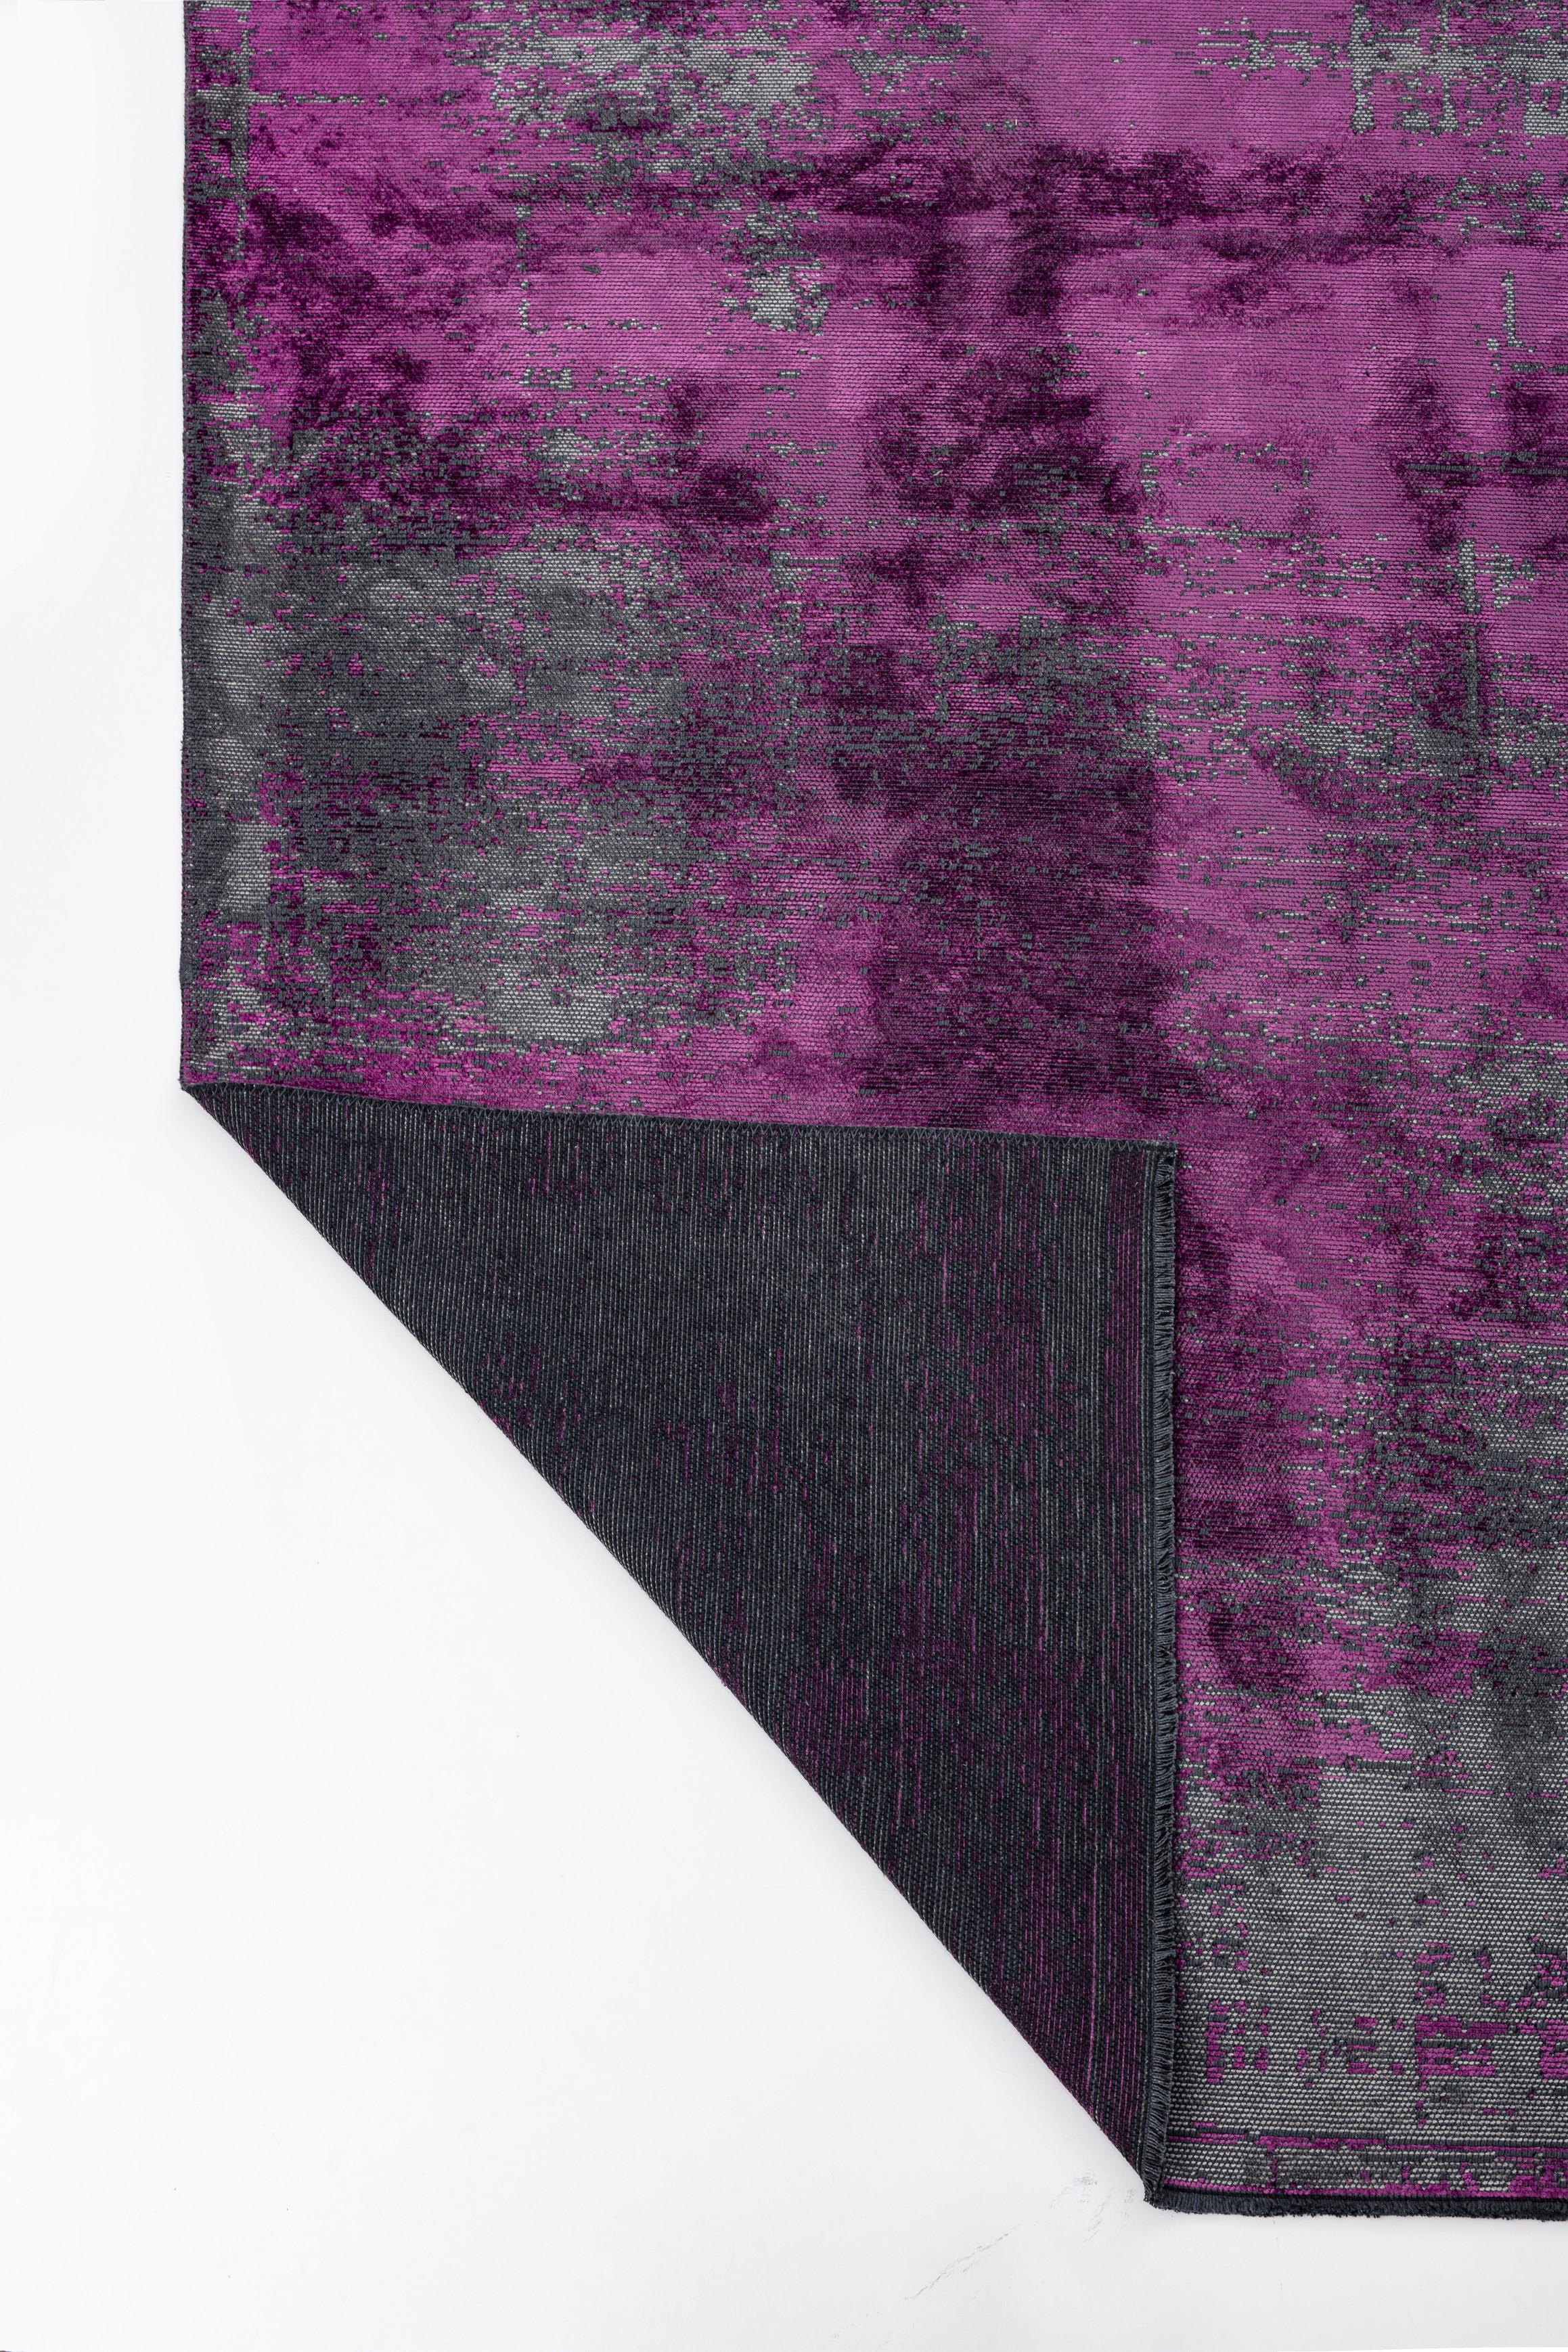 For Sale:  (Purple) Modern Abstract Luxury Hand-Finished Area Rug 3